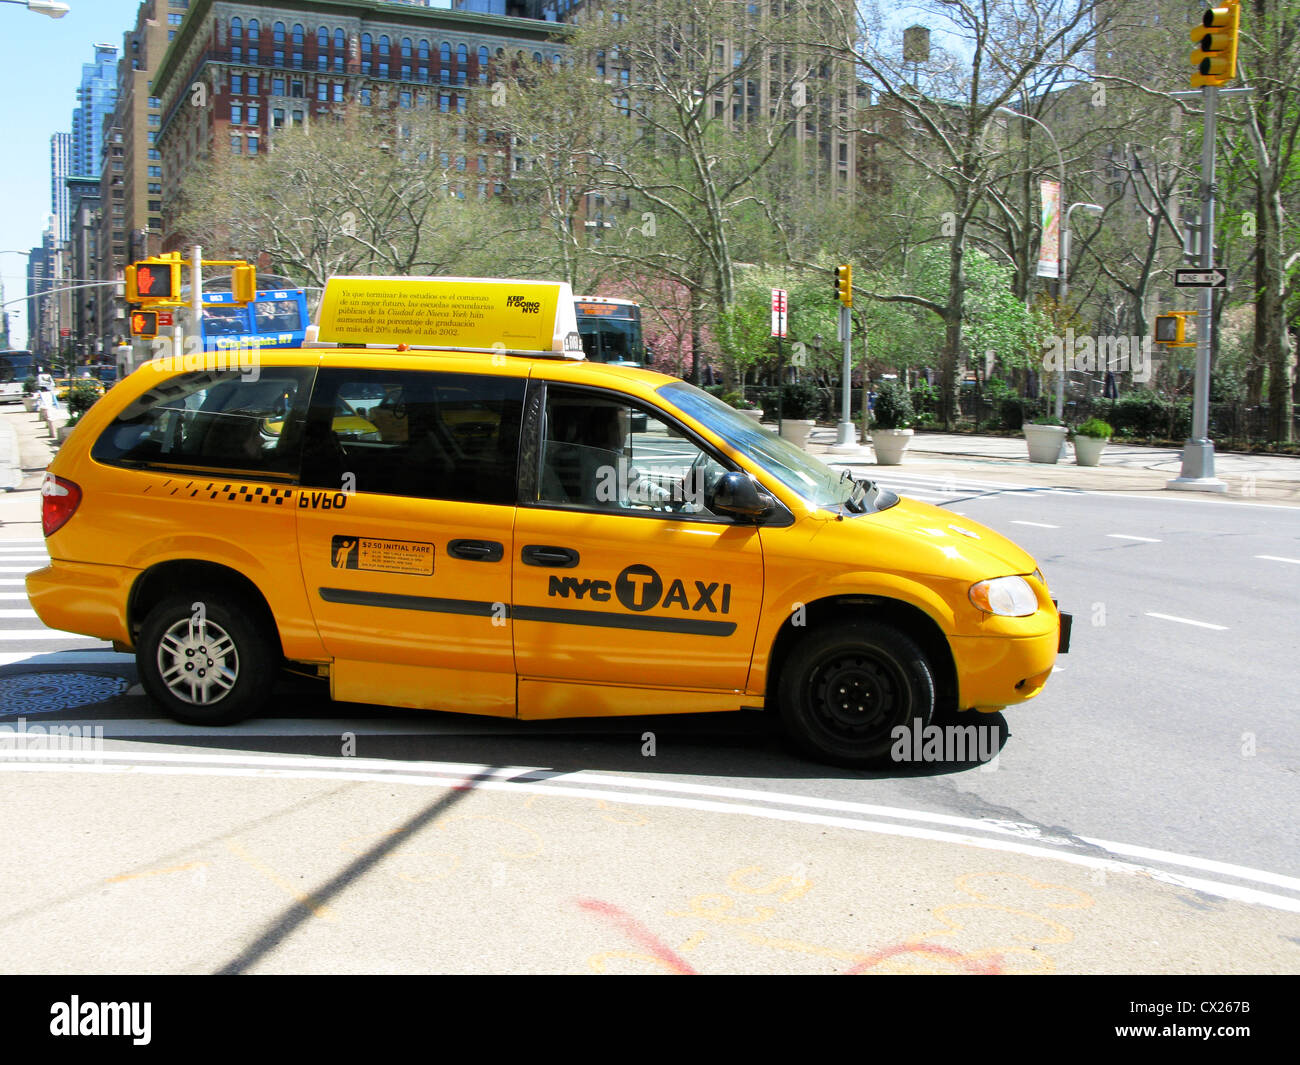 Large yellow New York taxi cab, NYC Taxi. Stock Photo